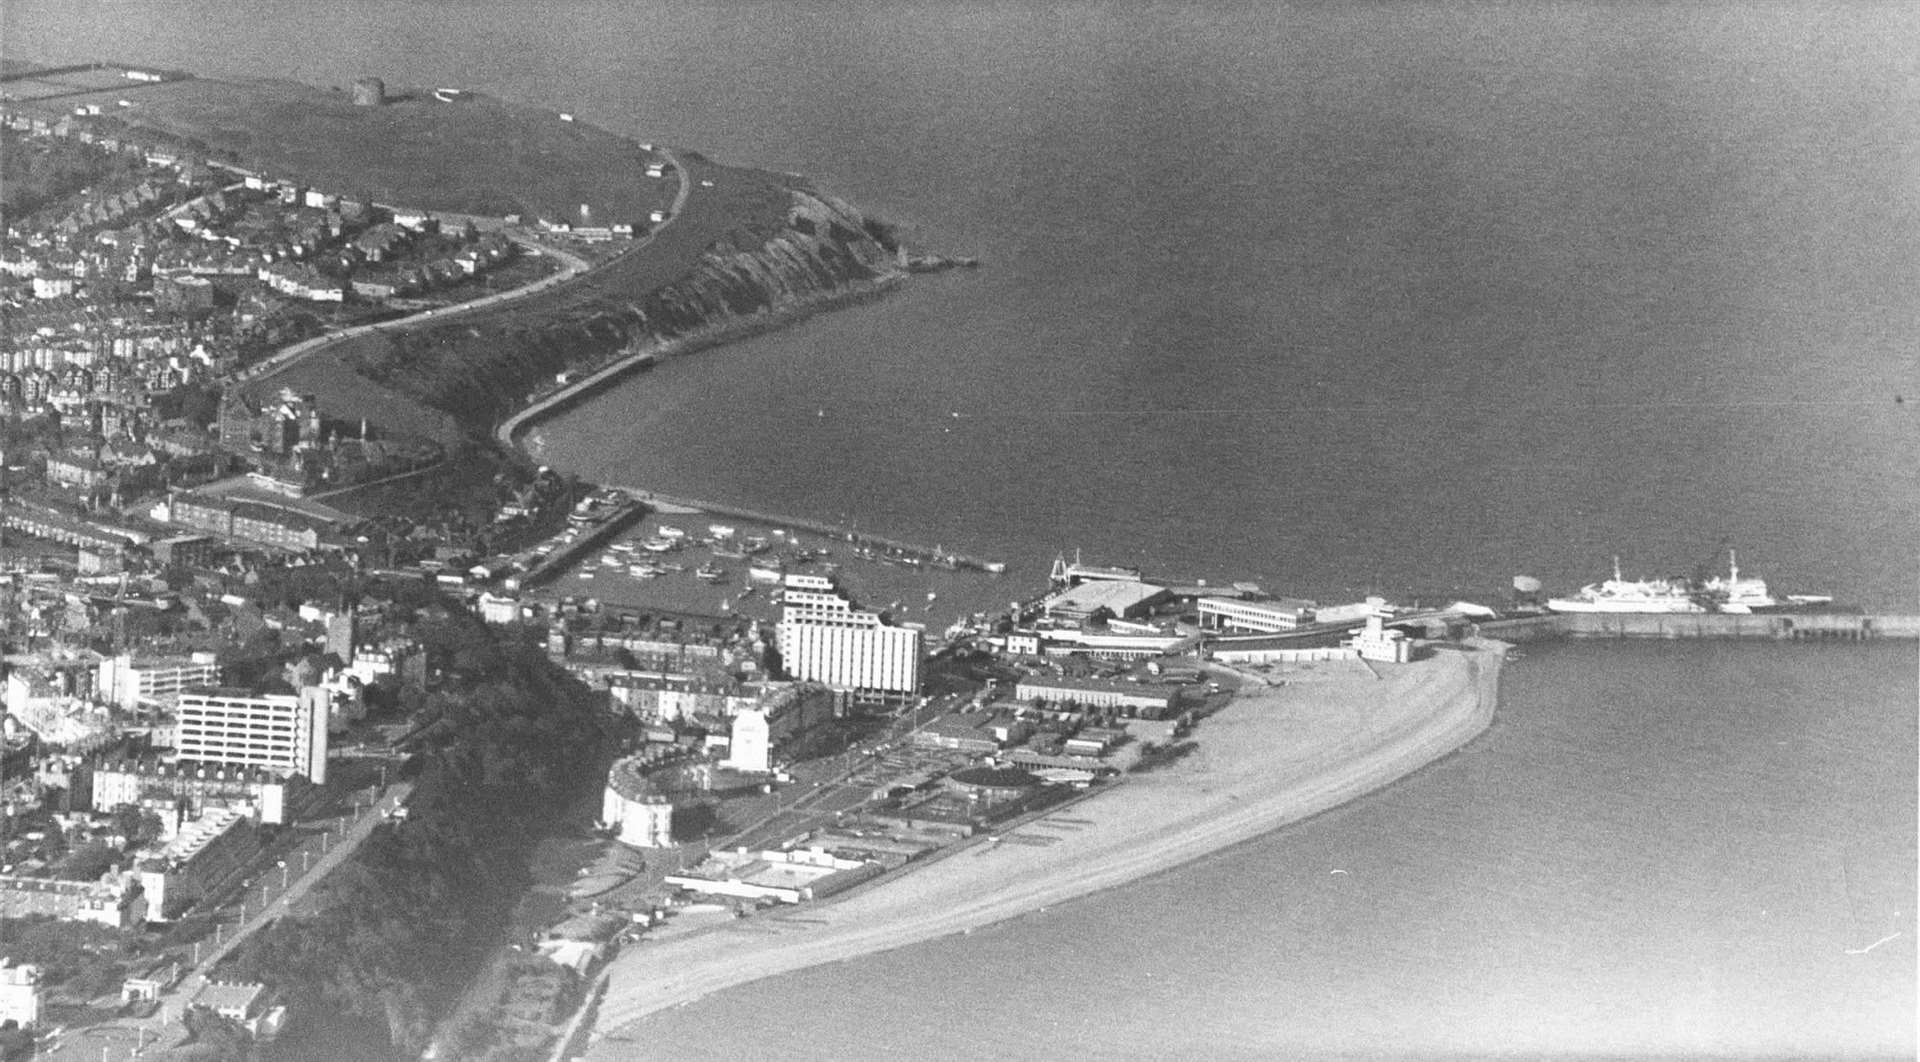 Looking down on Folkestone in 1975. The old ferry terminal can be seen, along with the now-demolished Rotunda site down near the seafront